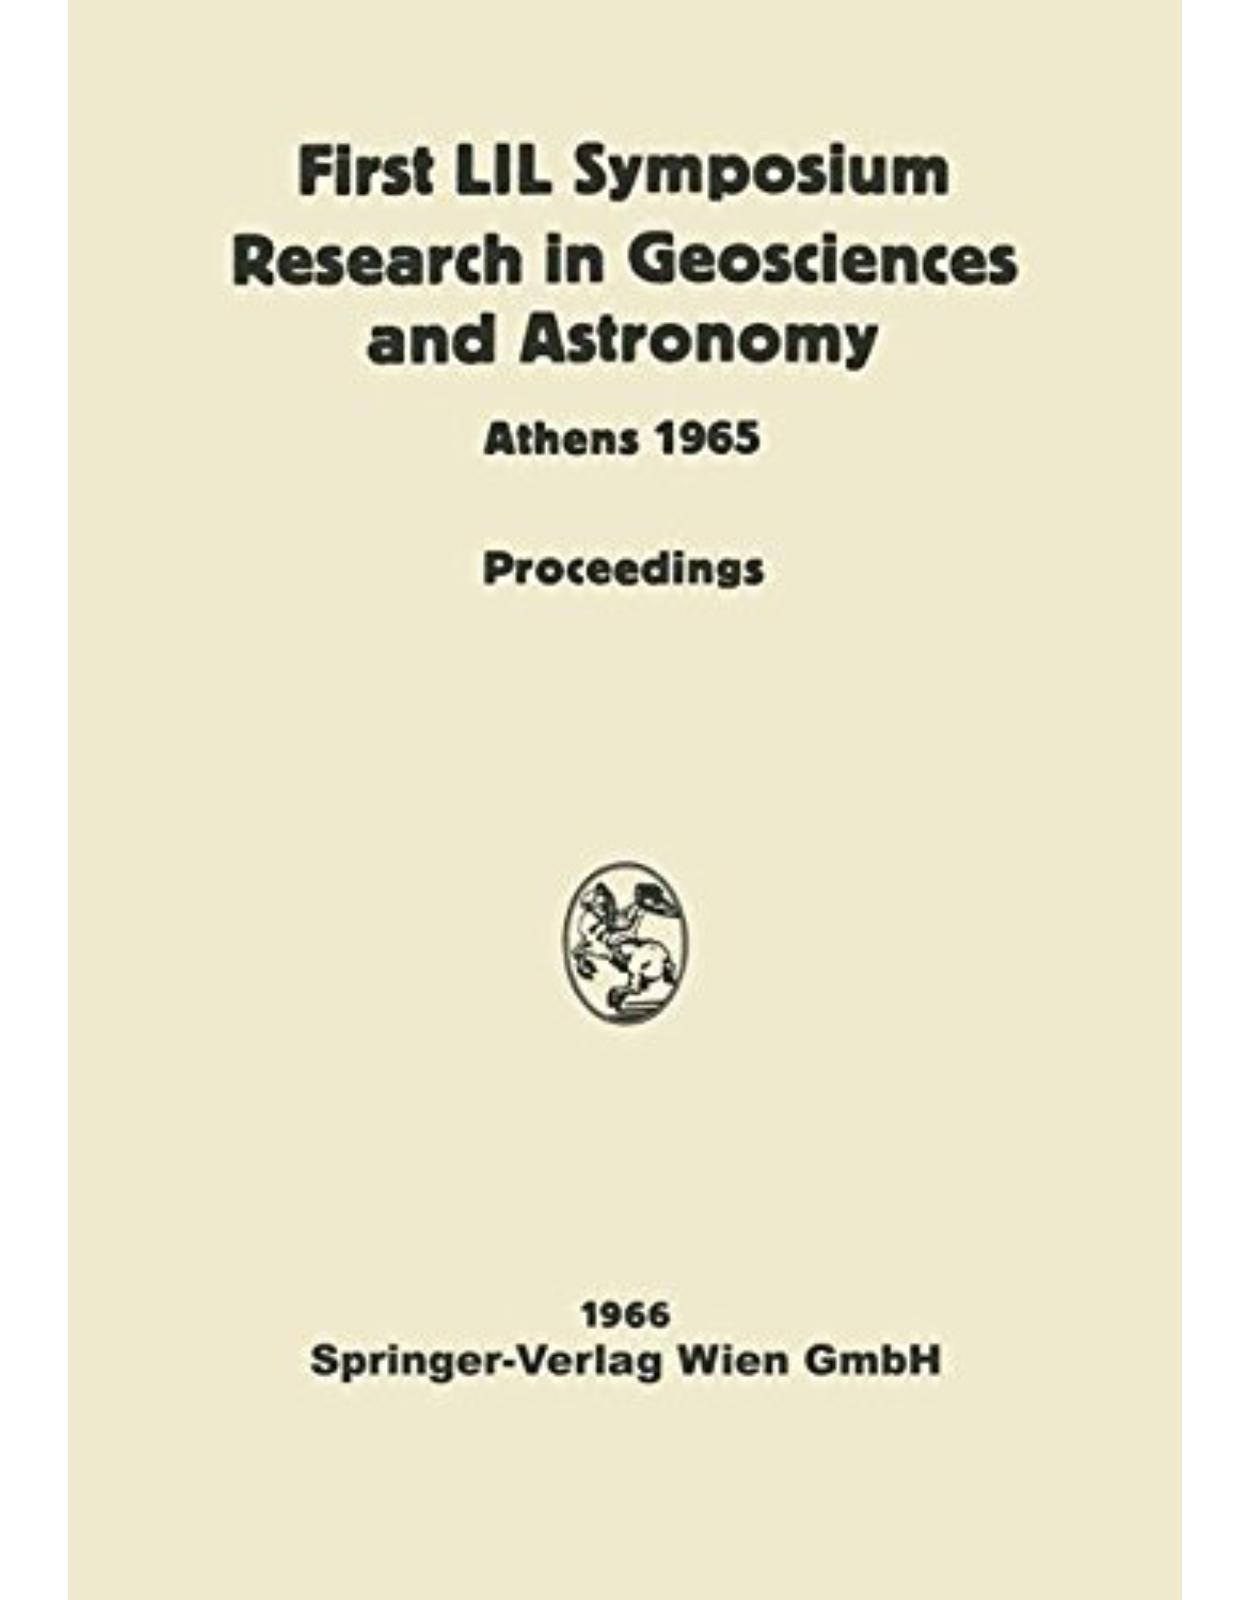 Proceedings of the First Lunar International Laboratory (LIL) Symposium Research in Geosciences and Astronomy